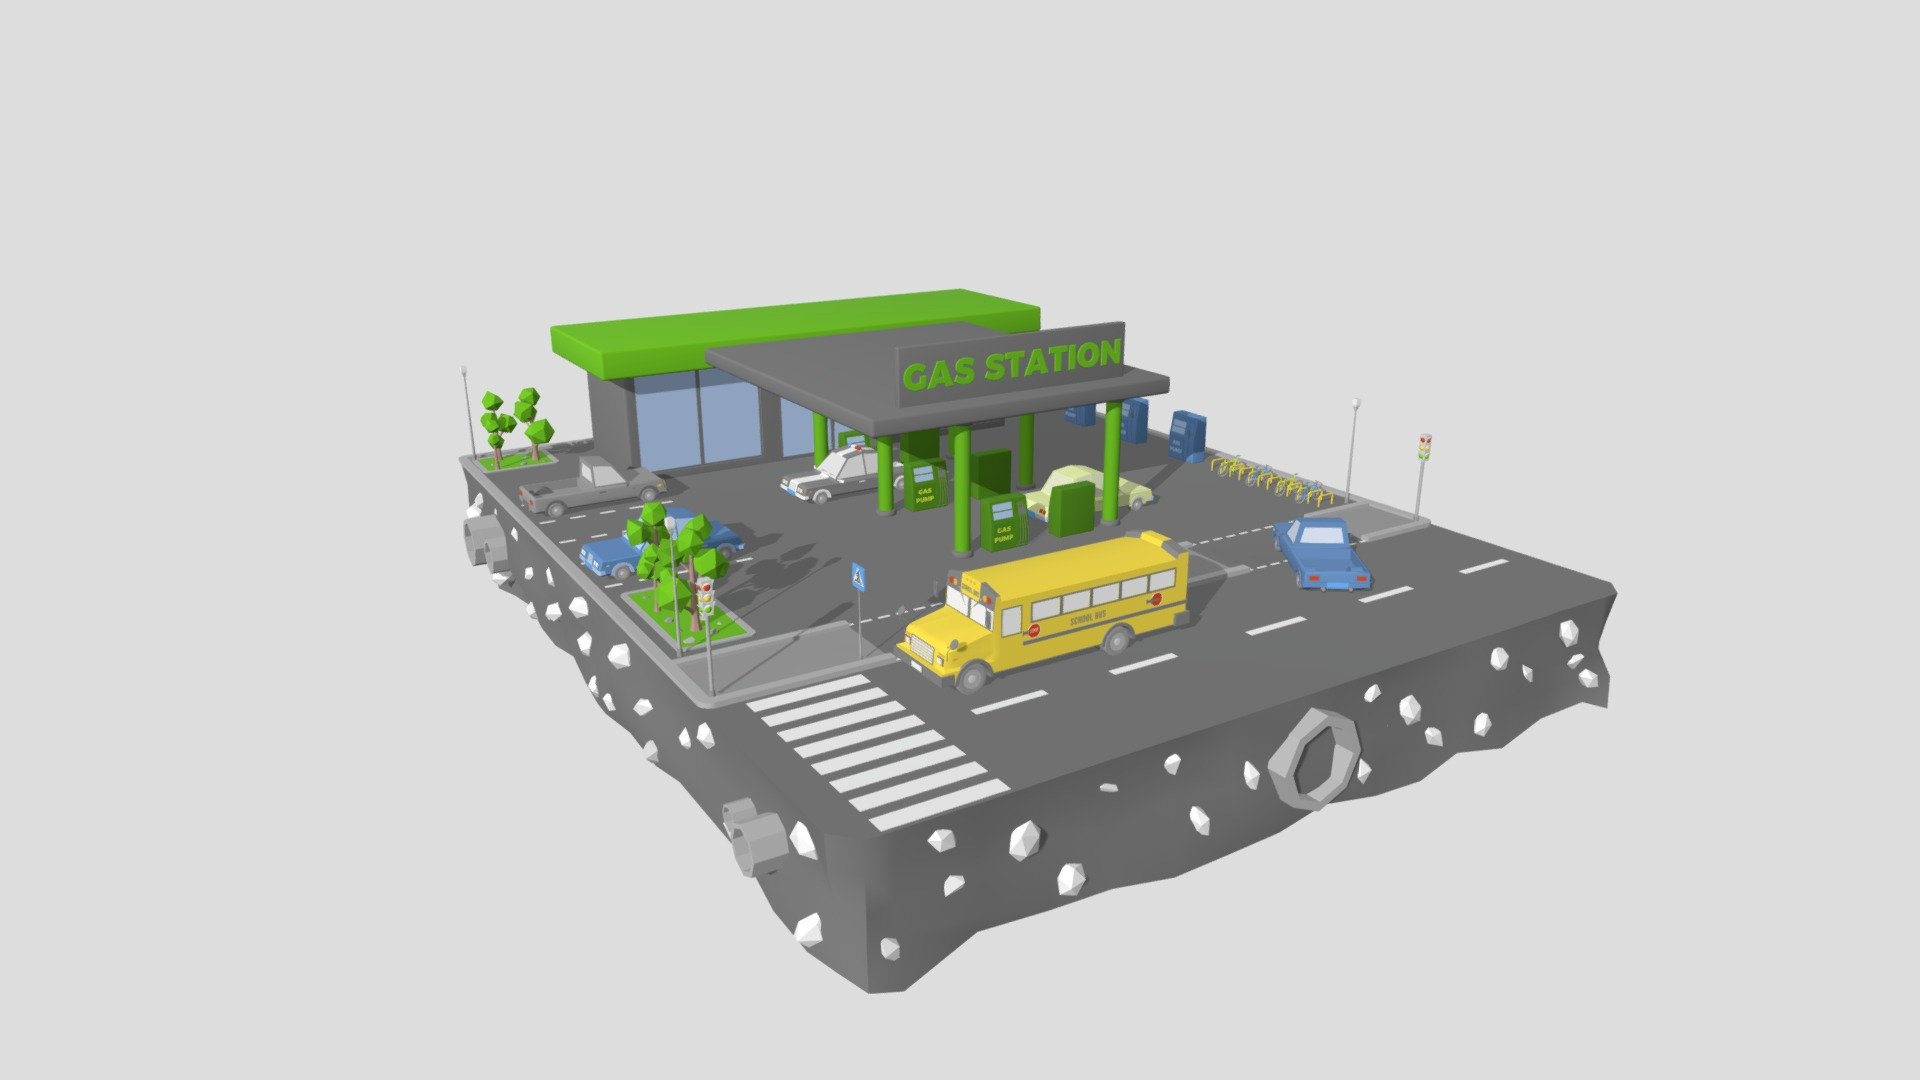 This is a great Gas Station Low Poly 3D model for you projects. 

This scene includes the following:

Low Poly Gas Station with Gas Pumps and Air Pumps
Low Poly Car Truck, Car, Police Car and School Bus
Low Poly Bicycles
Low Poly Trees
Traffic Lights, Road Signs

Created in Cinema4D R25. No third party plugins needed. Standard Render with standard materials. 

Formats included: .c4d .obj .fbx .3ds 

Poly Count: 159589, Points Count: 169775, Object Count: 2660

I hope you will like it. Also, make sure to check my other models. Don’t forget to leave the feedback and rate the models. Thank you

station, 3d, gas, gasoline, fuel, oil, pump, transportation, diesel, energy, petrol, petroleum, hose, sign, render, gas station, car, equipment, transport, service, tank, auto, automobile, vehicle, illustration, pipe, filling station, fuel pump, 3d illustration, isolated - Gas Station Low Poly - 3D model by ruslanmikaielian 3d model